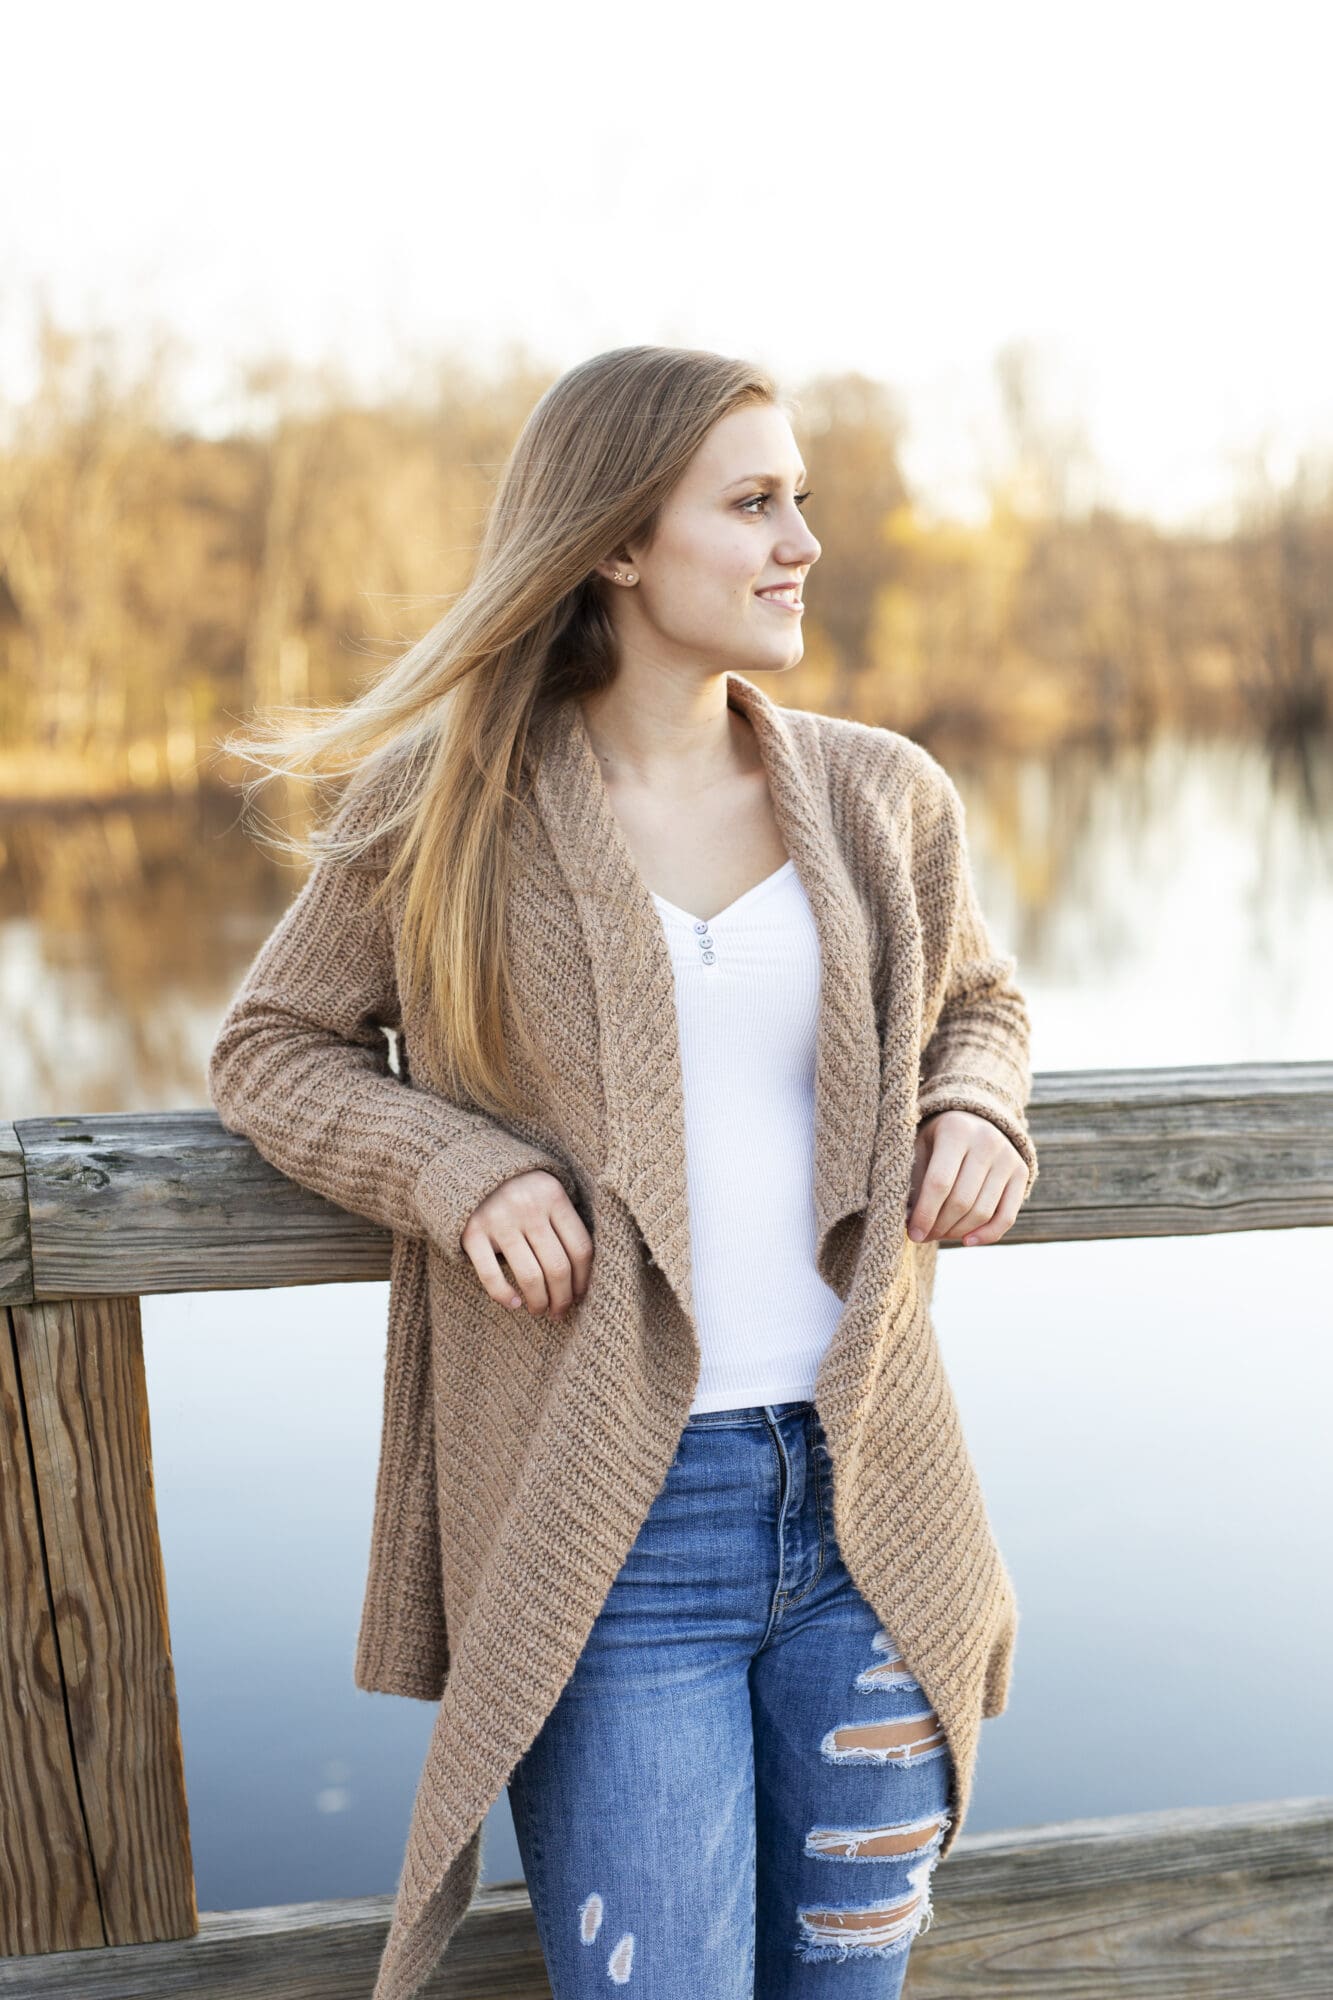 senior girl leans on wooden bridge looking over her shoulder with hair blowing in the wind